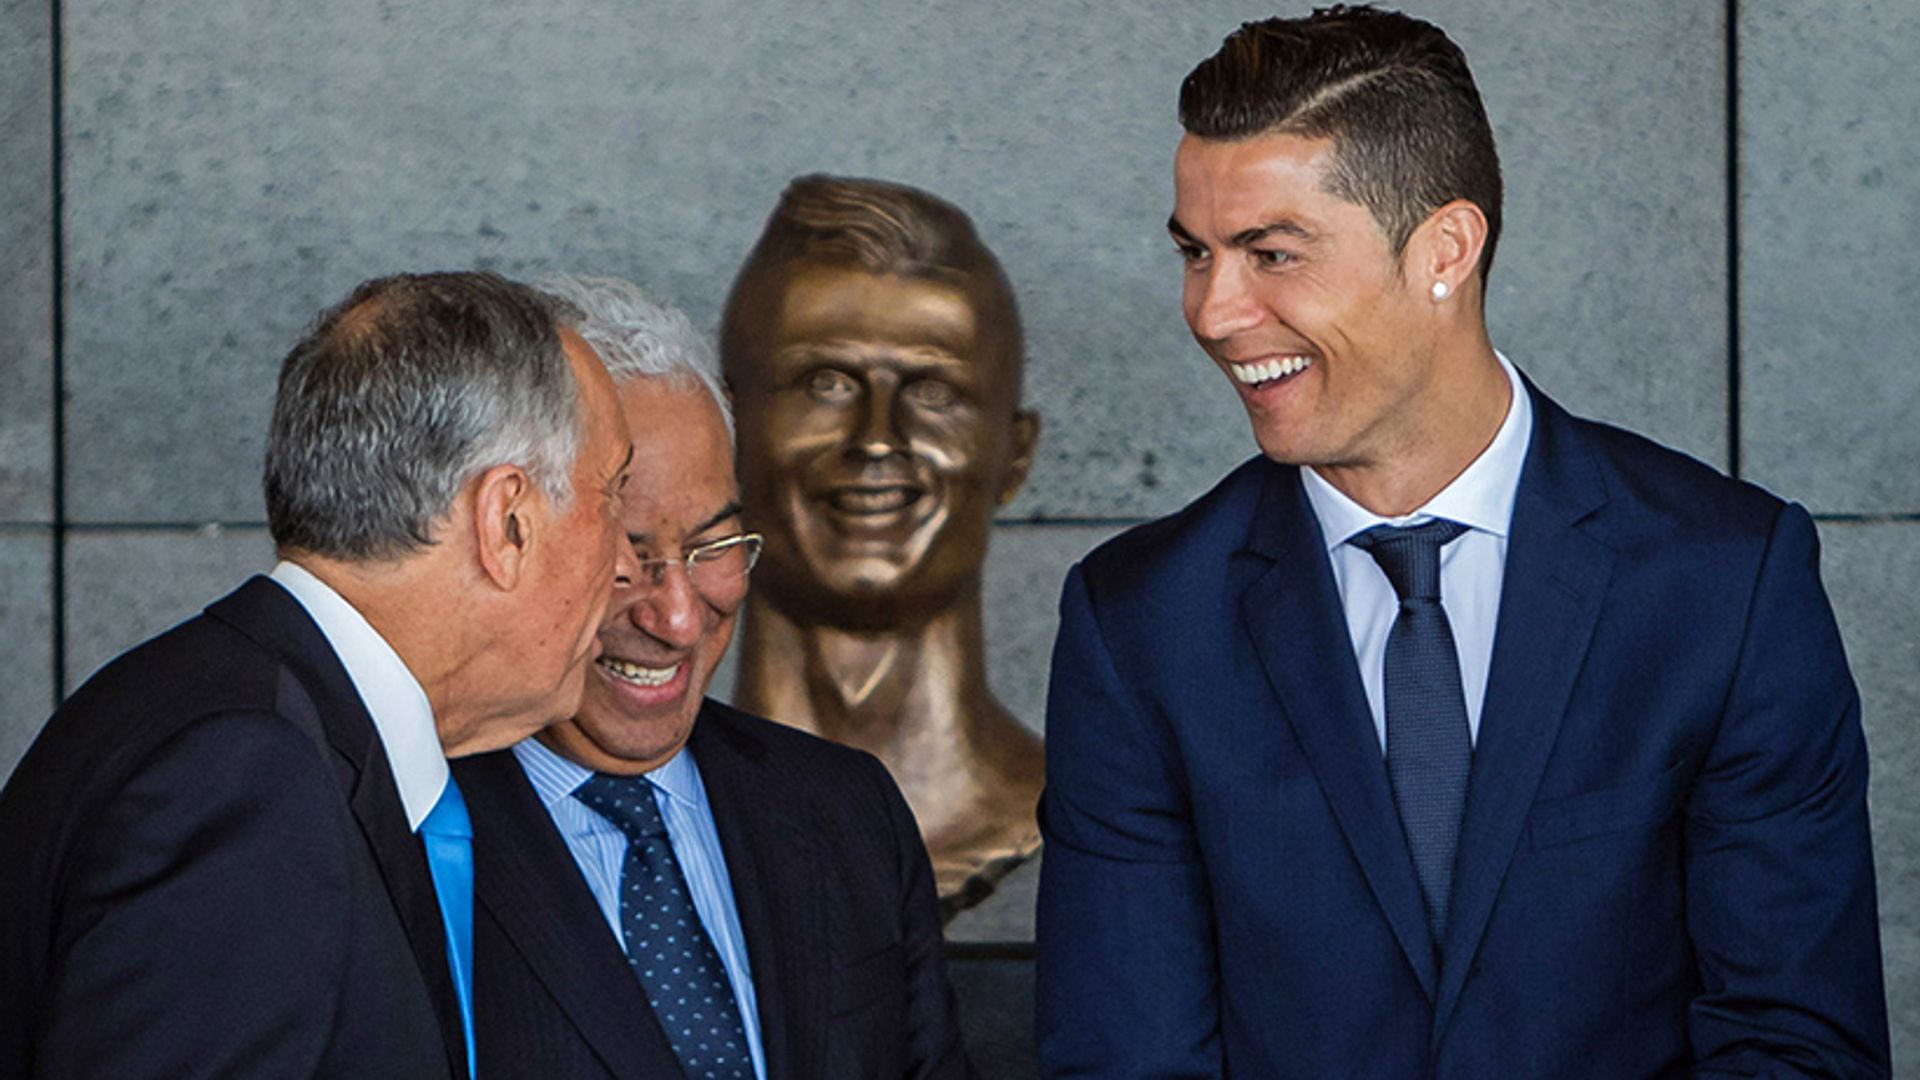 Cristiano Ronaldo sculptor explains why statue doesn't look like him